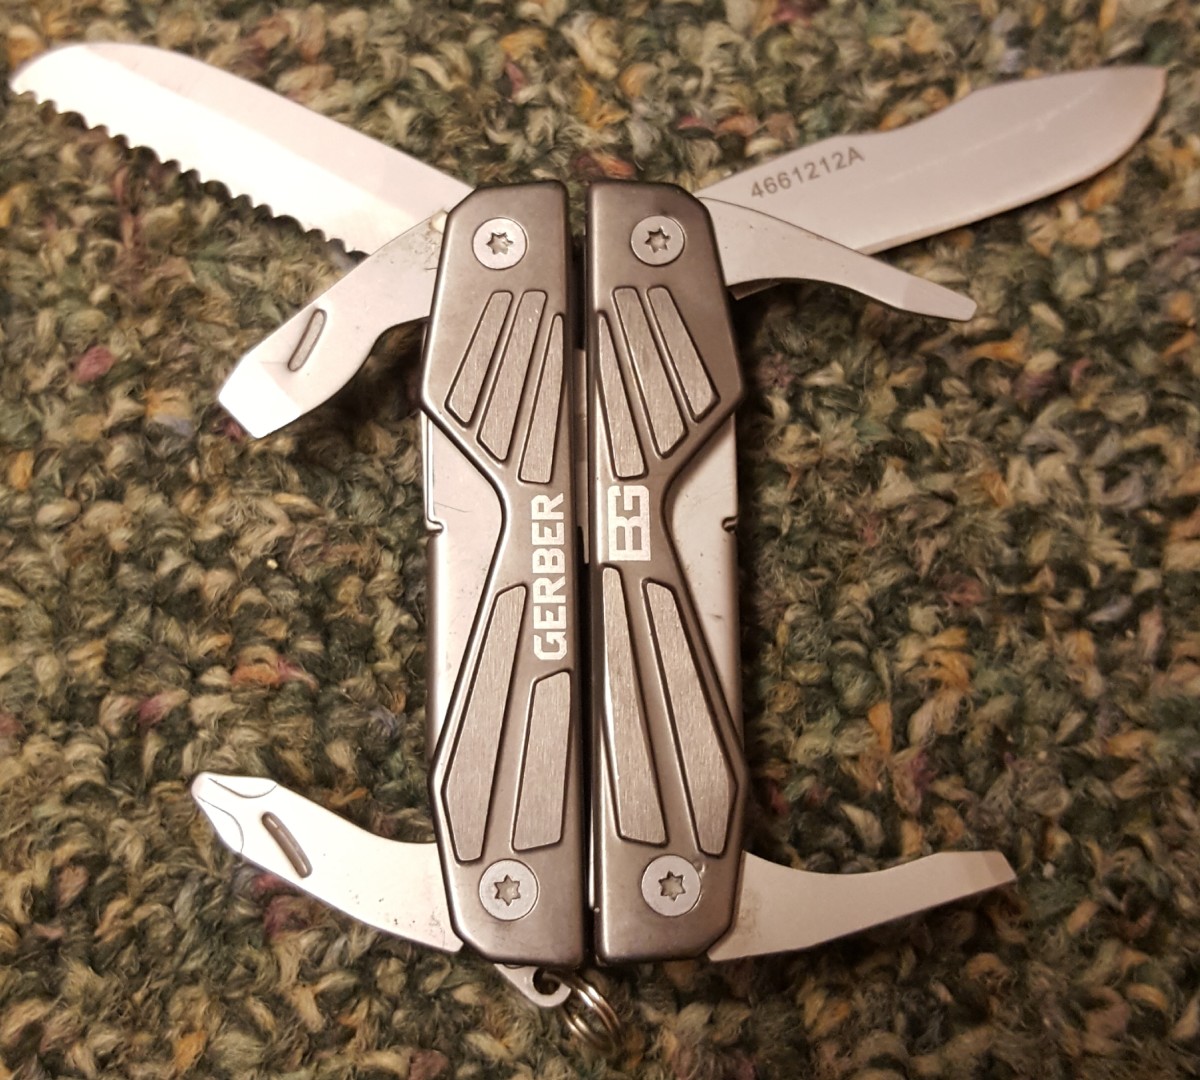 Gerber Bear Grylls Compact Multi-Tool Review: Is It Worth Its Weight?